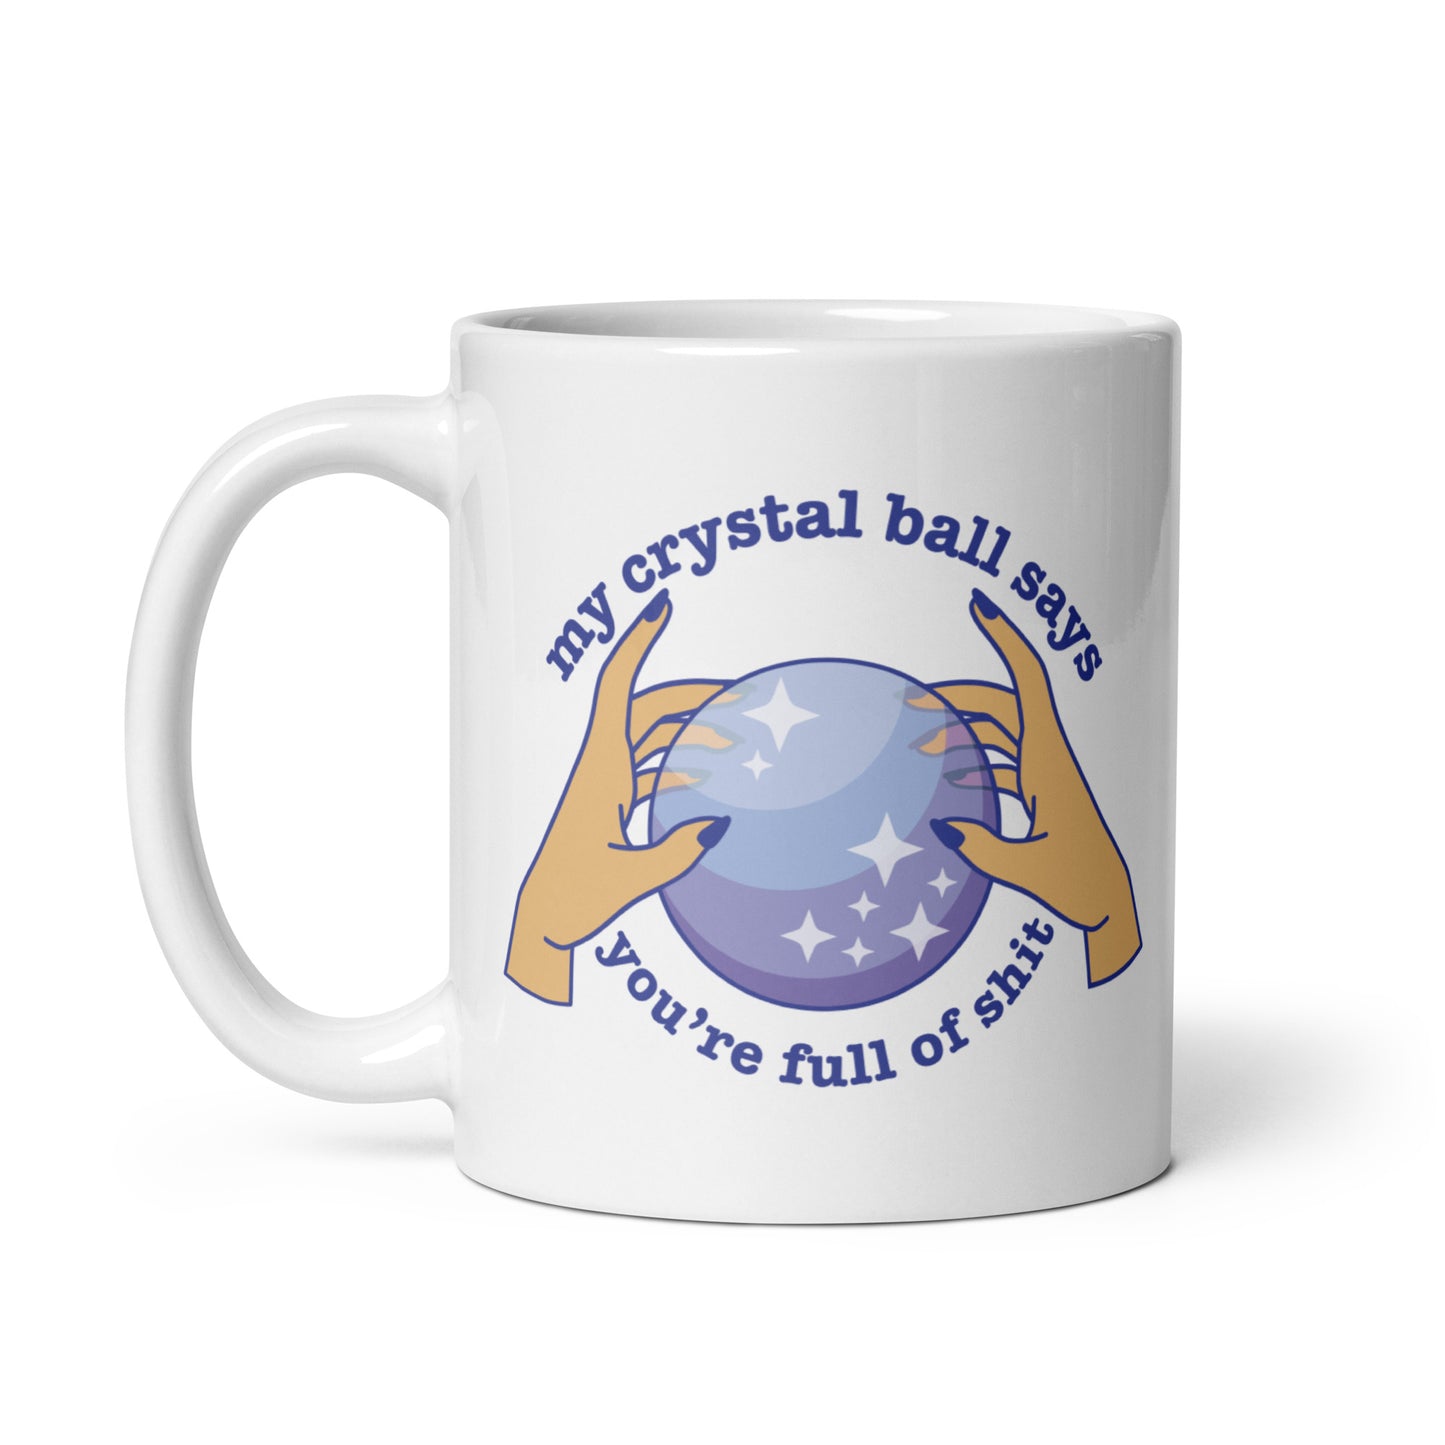 A white 11 ounce ceramic mug with a picture of hands on a crystal ball and text reading "My crystal ball says you're full of shit"